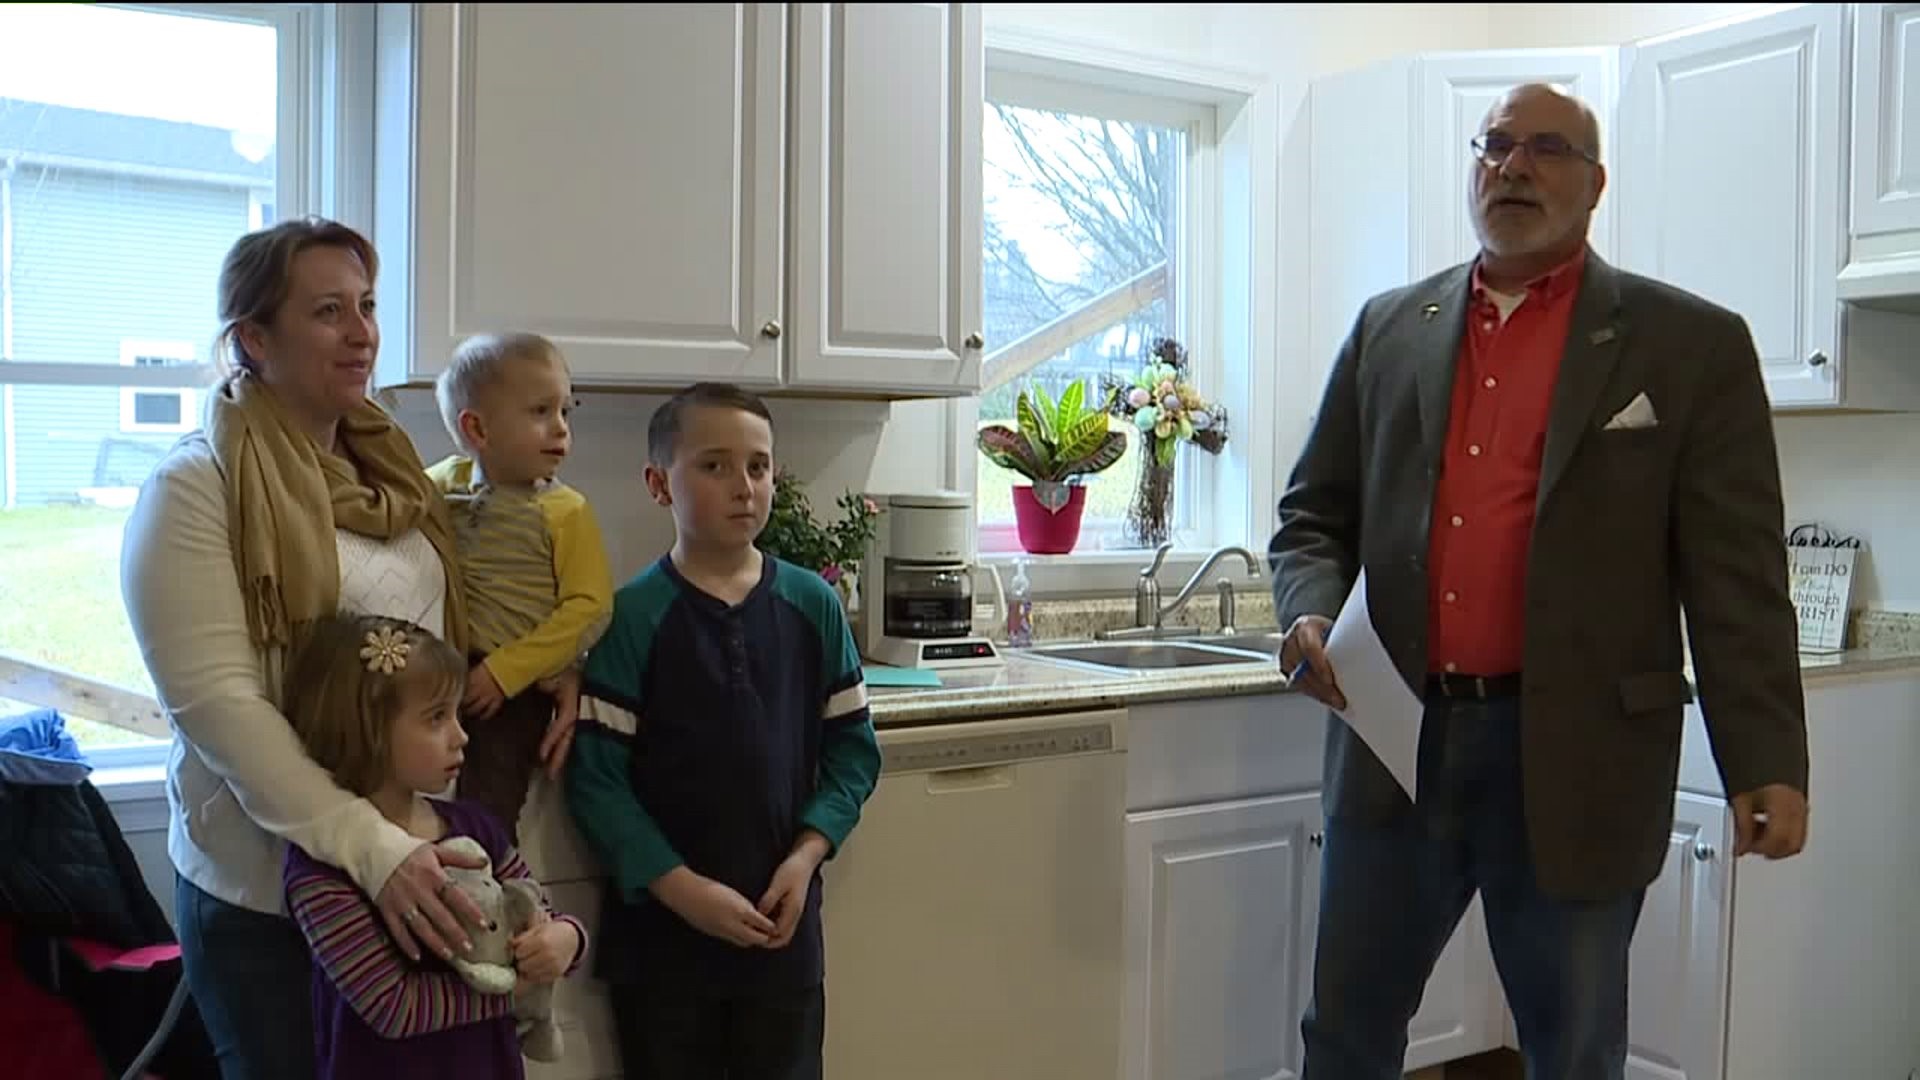 Mother of Three Gets New Home Thanks to Habitat for Humanity